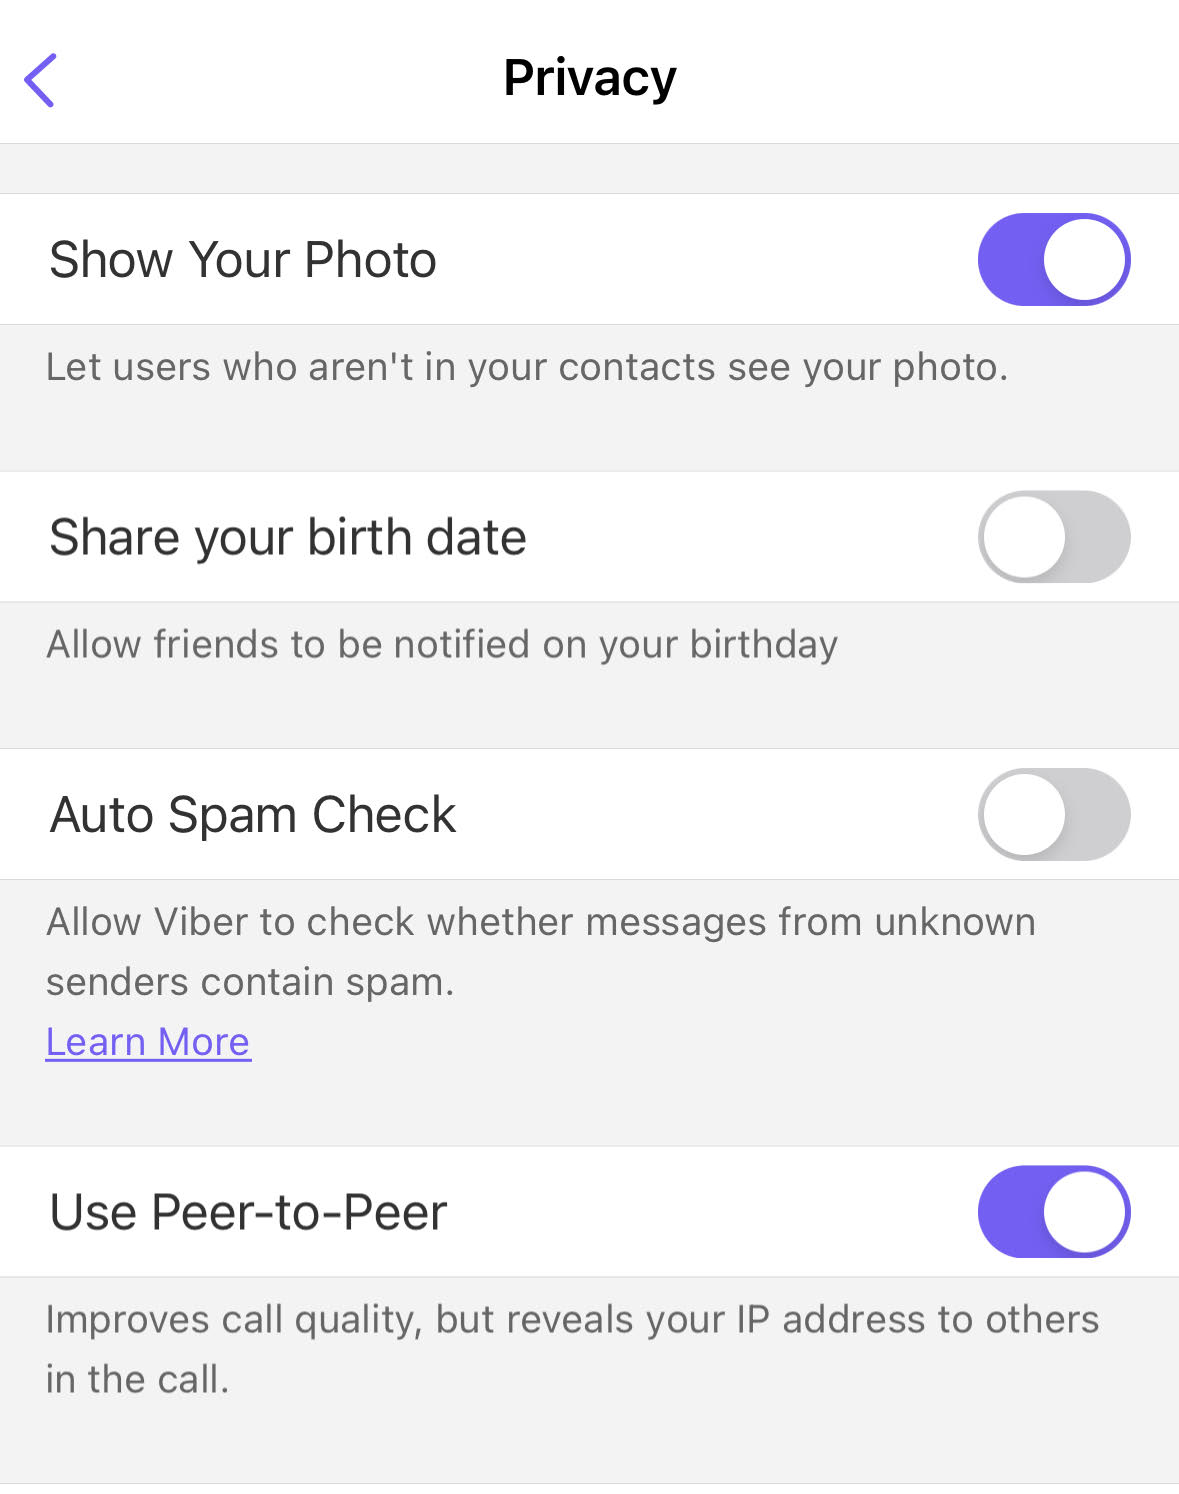 Setting in Viber to switch off peer-to-peer calls.